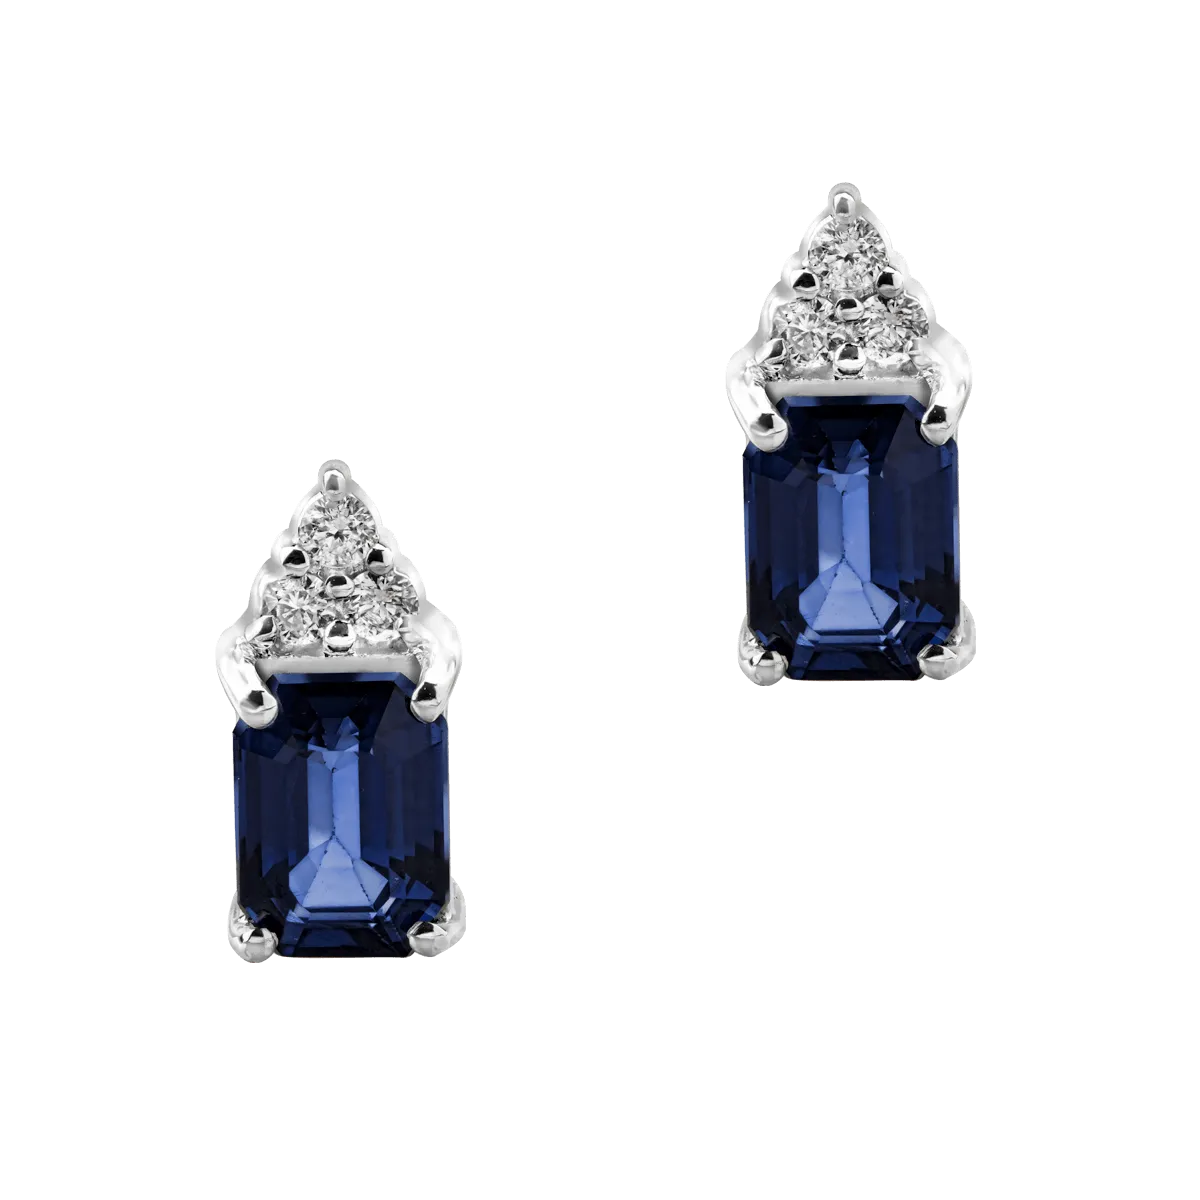 14K white gold earrings with 2.07ct treated sapphires and 0.13ct diamonds